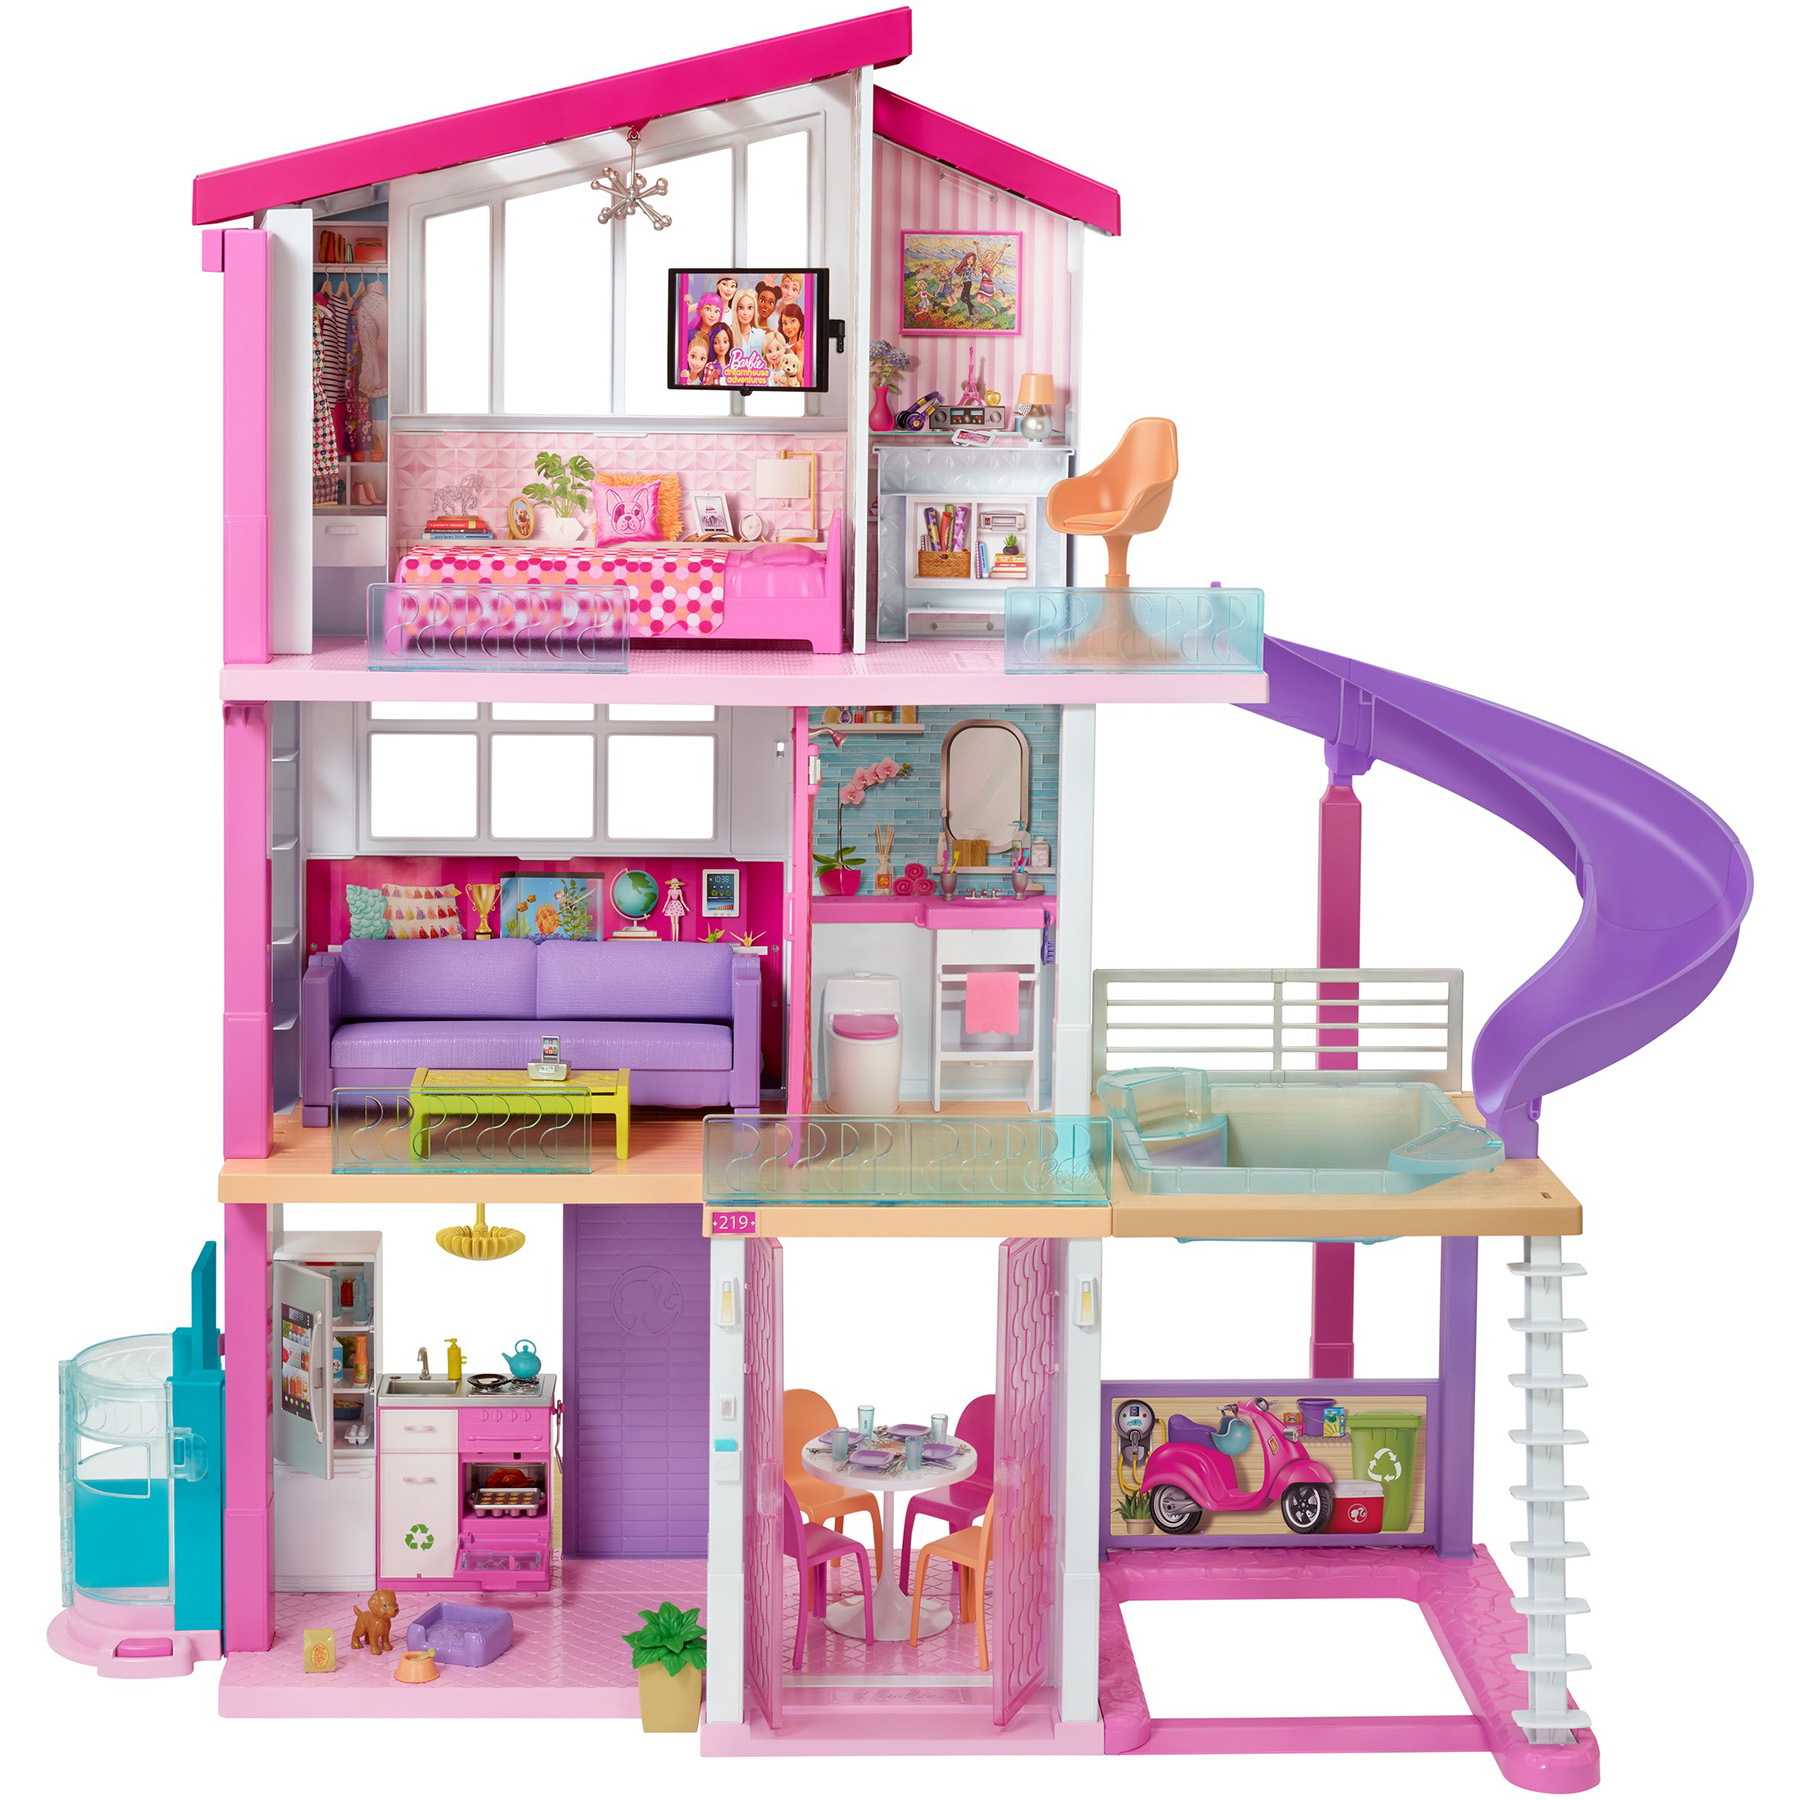 kmart toys 3 year old